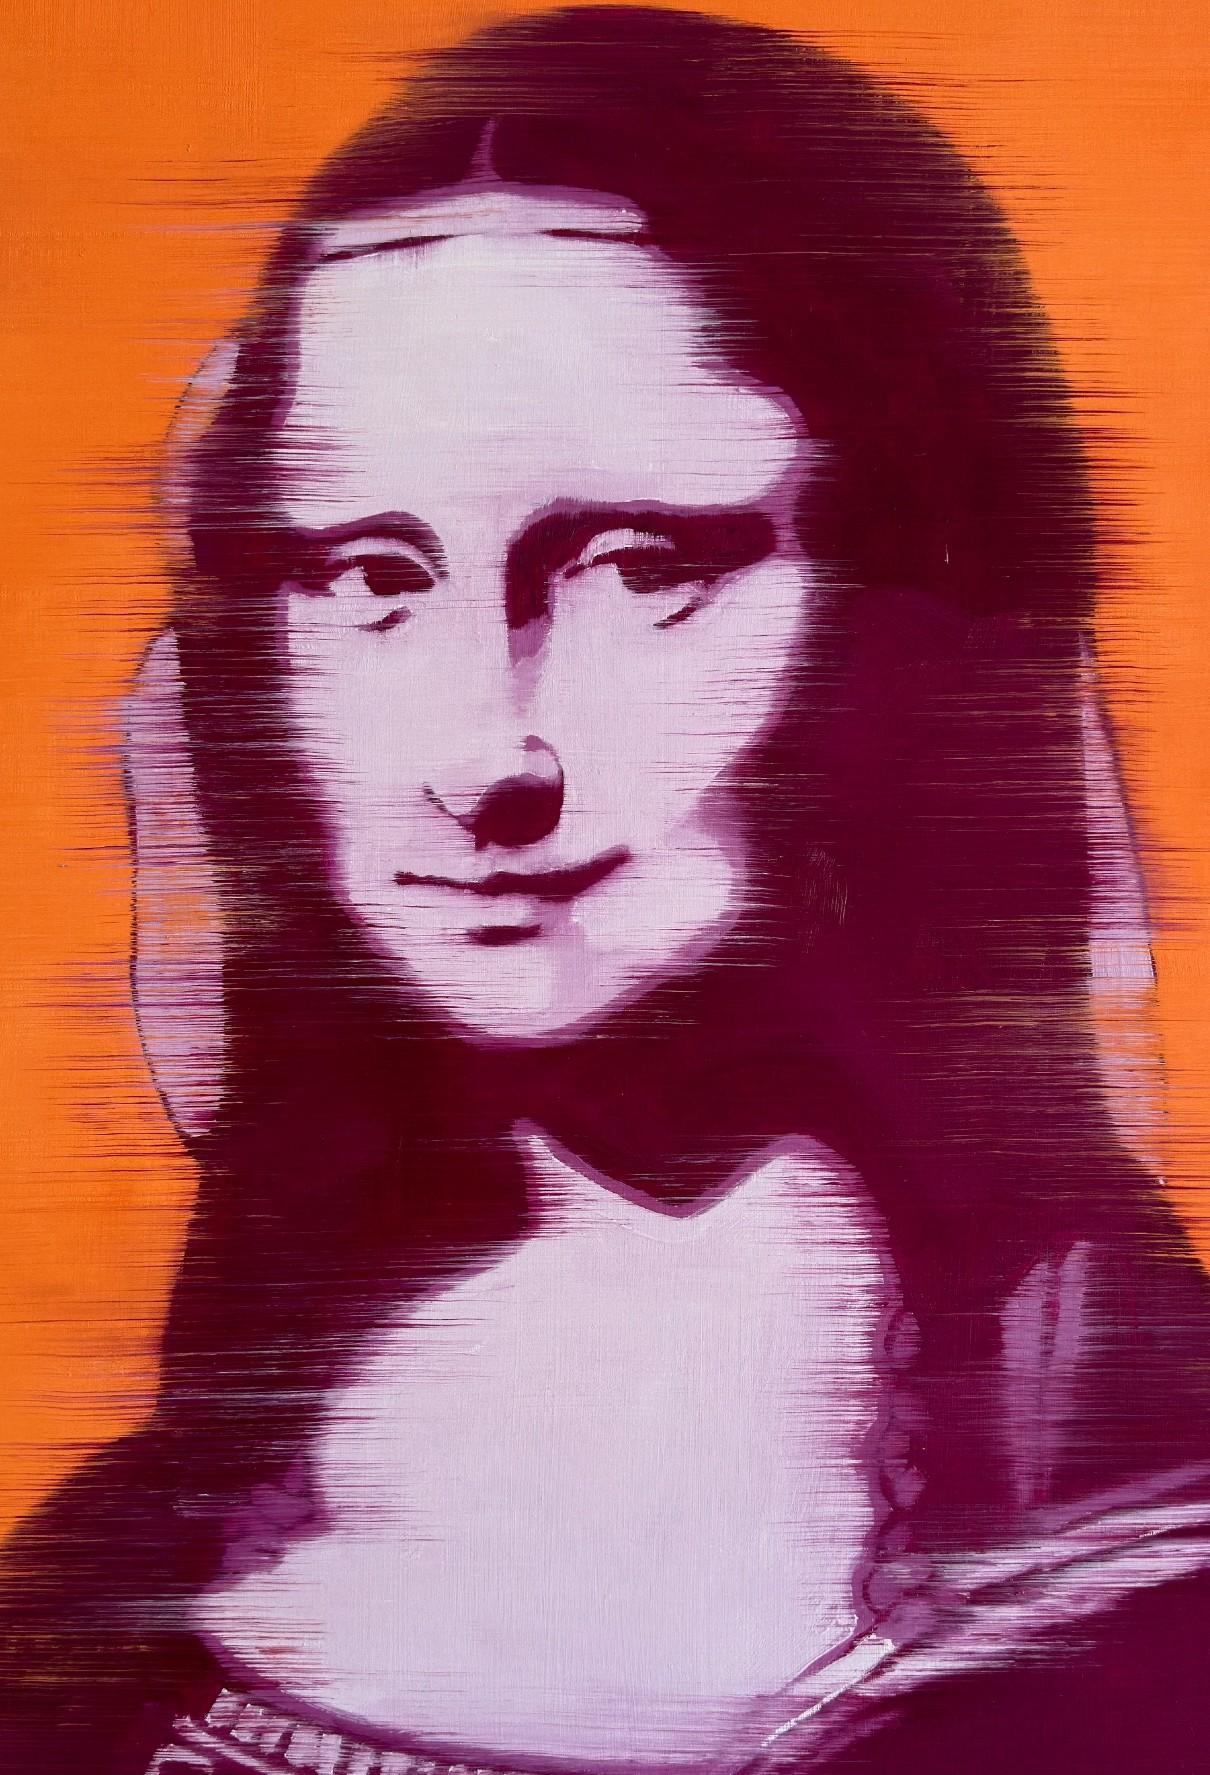 LOOK FOR FREE SHIPPING AT CHECKOUT.

ARTIST EXPLANATION OF THE PAINTINGS:
Mona Lisa Orange and Purple  measures  20 x 16